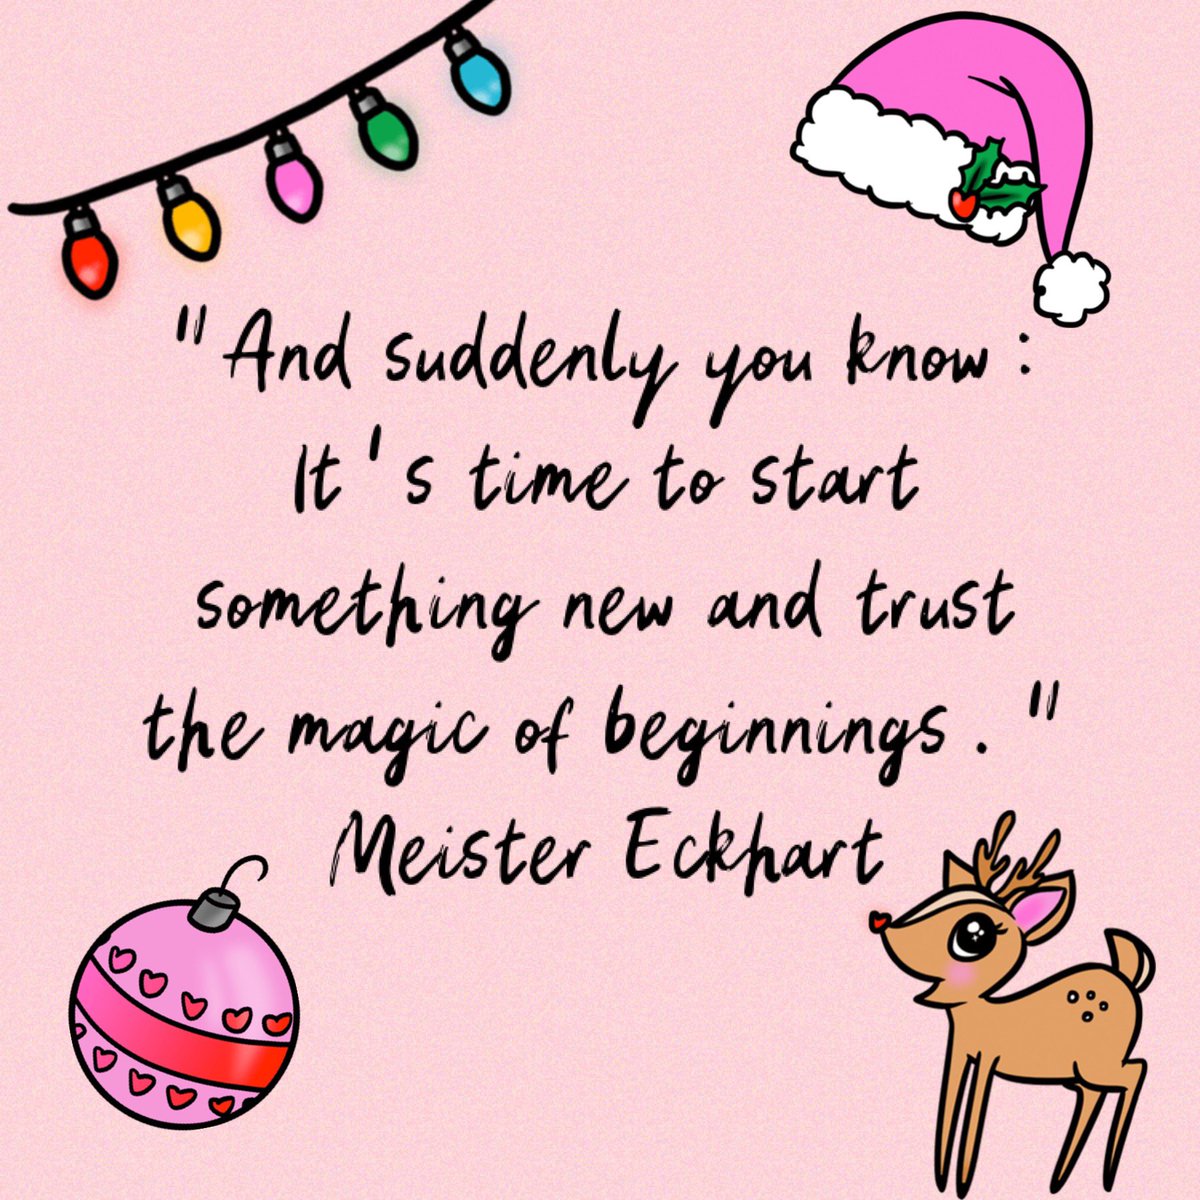 Good morning 💕🎄 Have a beautiful day! 💕🎄💕 #quoteoftheday #education #earlychildhood #beginnings